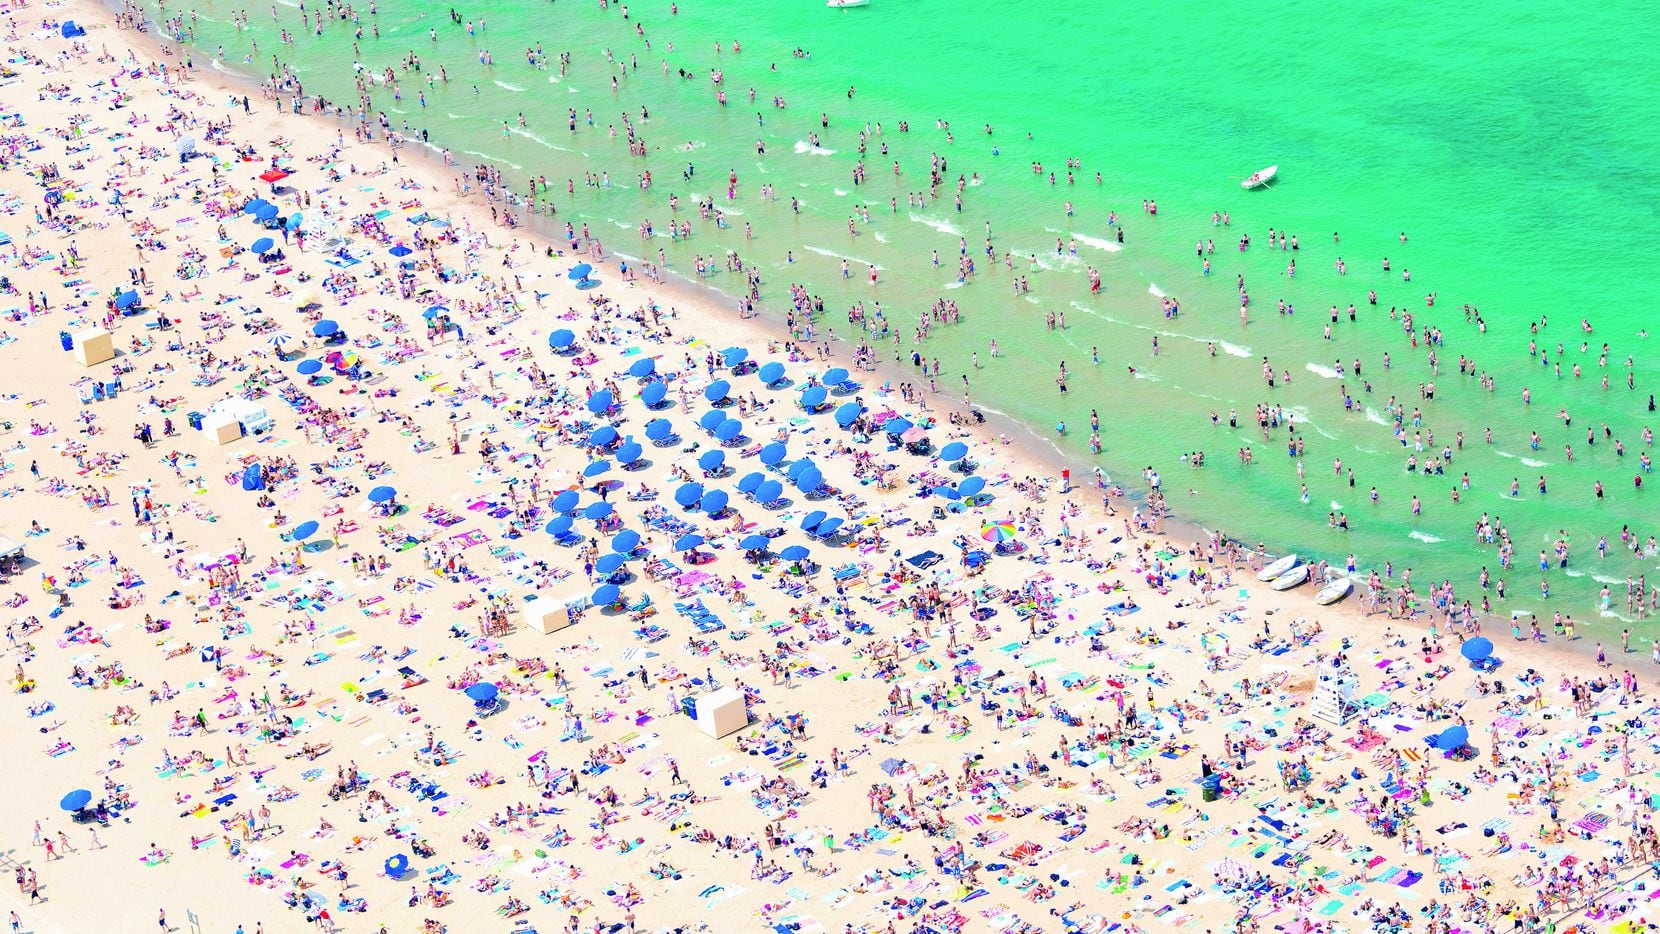 Photographer Gray Malin's new book, "Coastal," features aerial images of famous beaches...